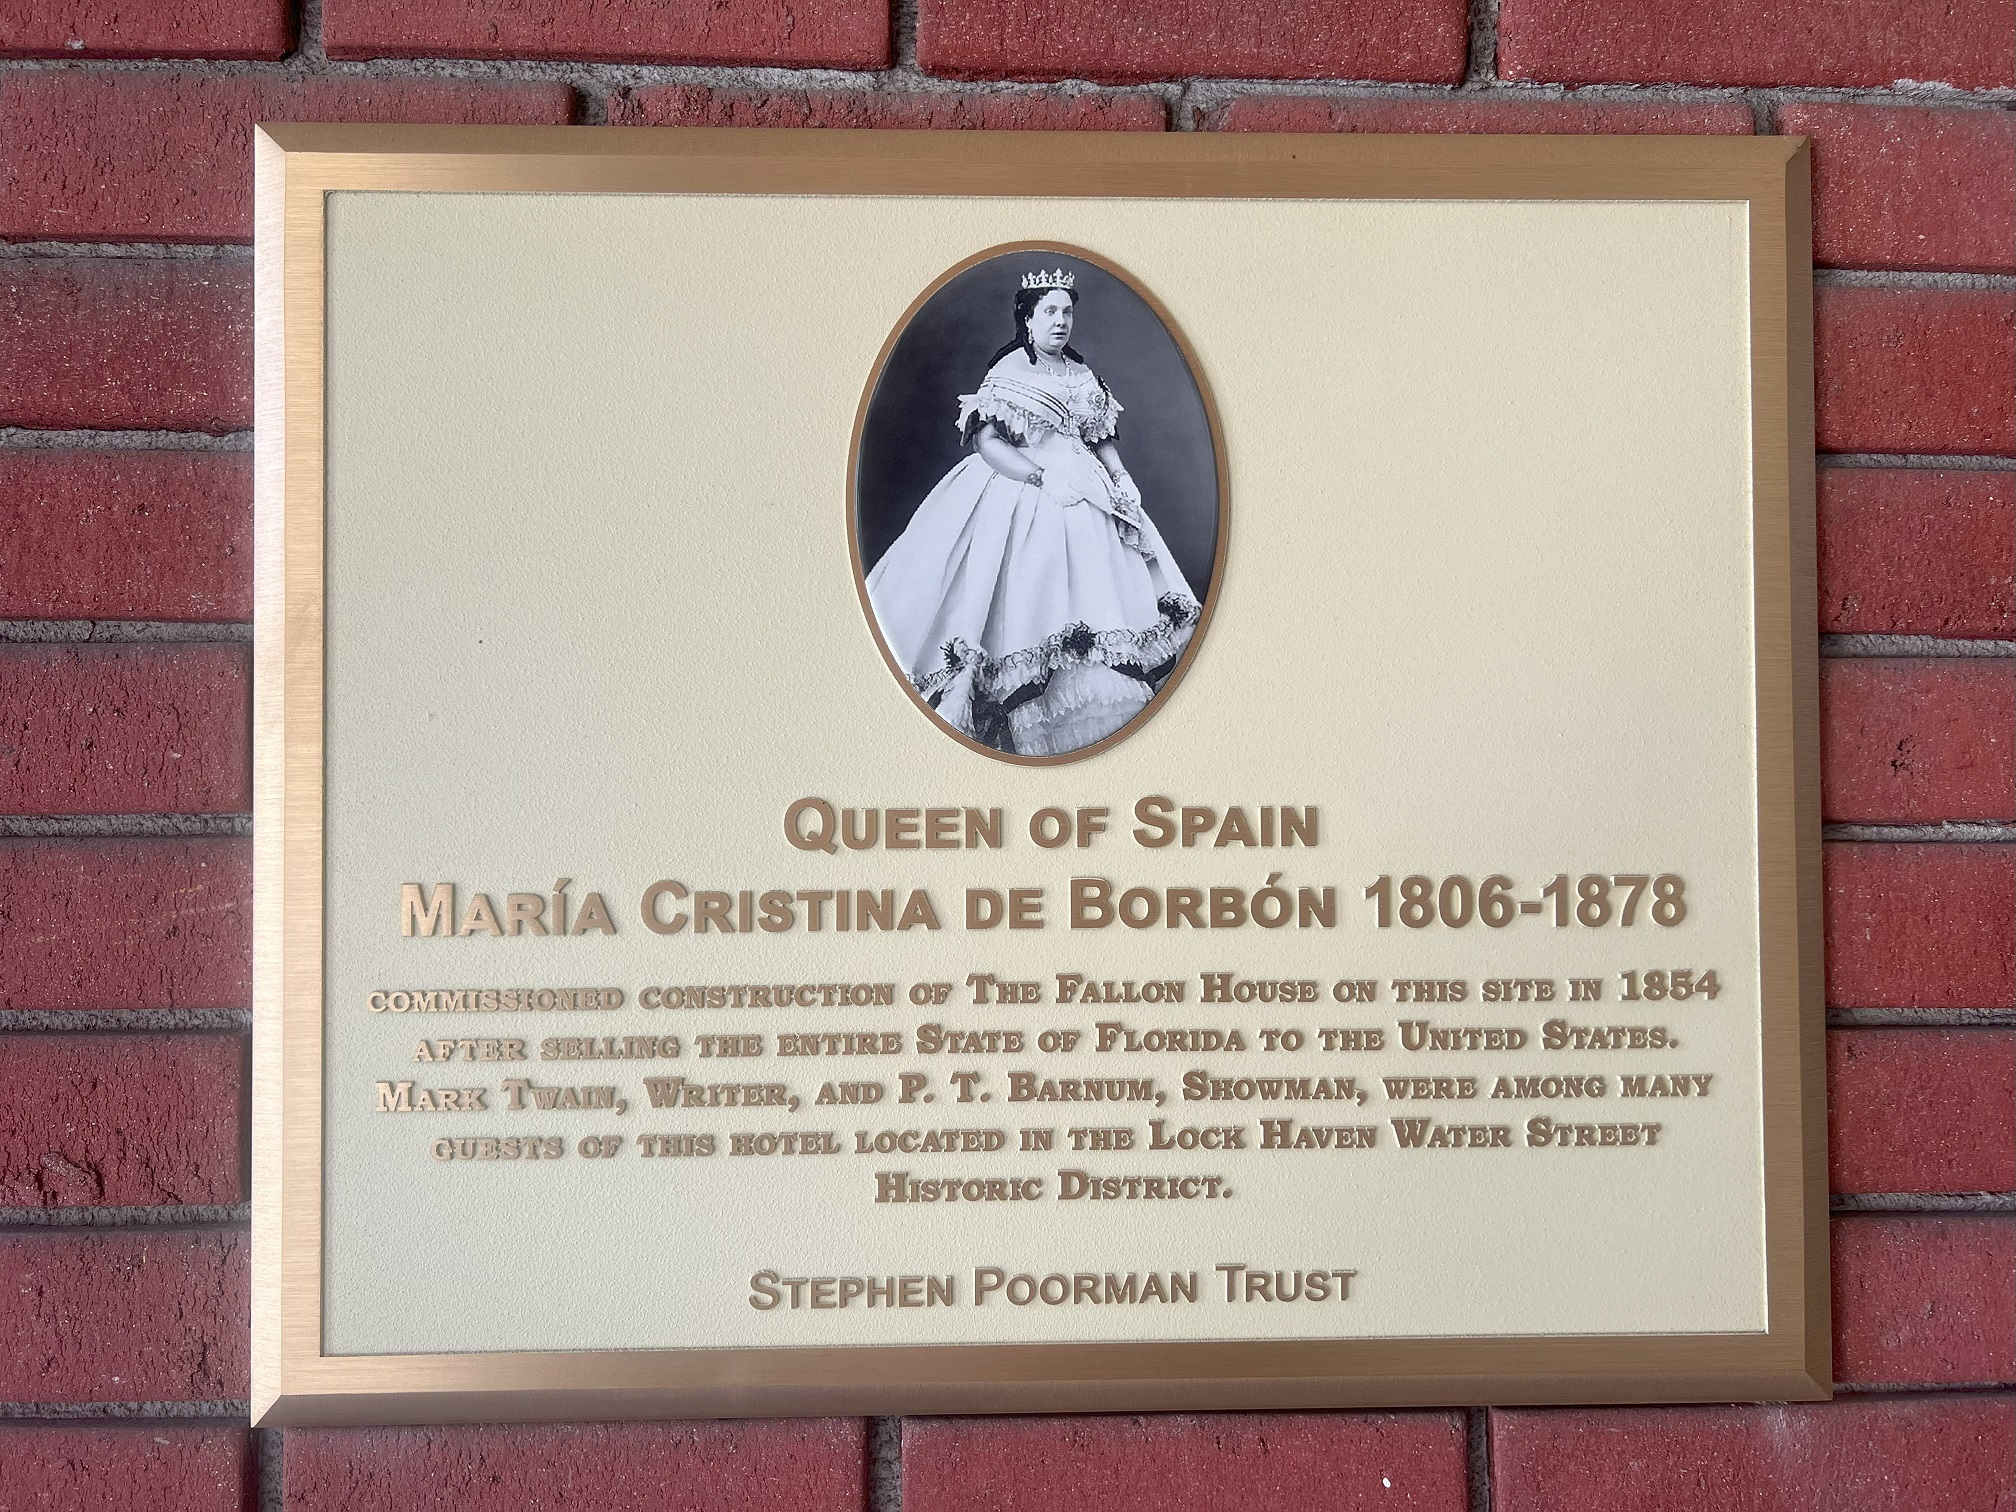 Square sign on wall with image of a woman above the words "Queen of Spain Maria Cristina de Borbon 1806-1878, Commissioned Construction of The Fallon House on this site in 1854 after selling the entire state of Florida to the United States. Mark Twain, writer, and P.T. Barnum, Showman, were among many guests of this hotel located in the Lock Haven Water Street Historic District."